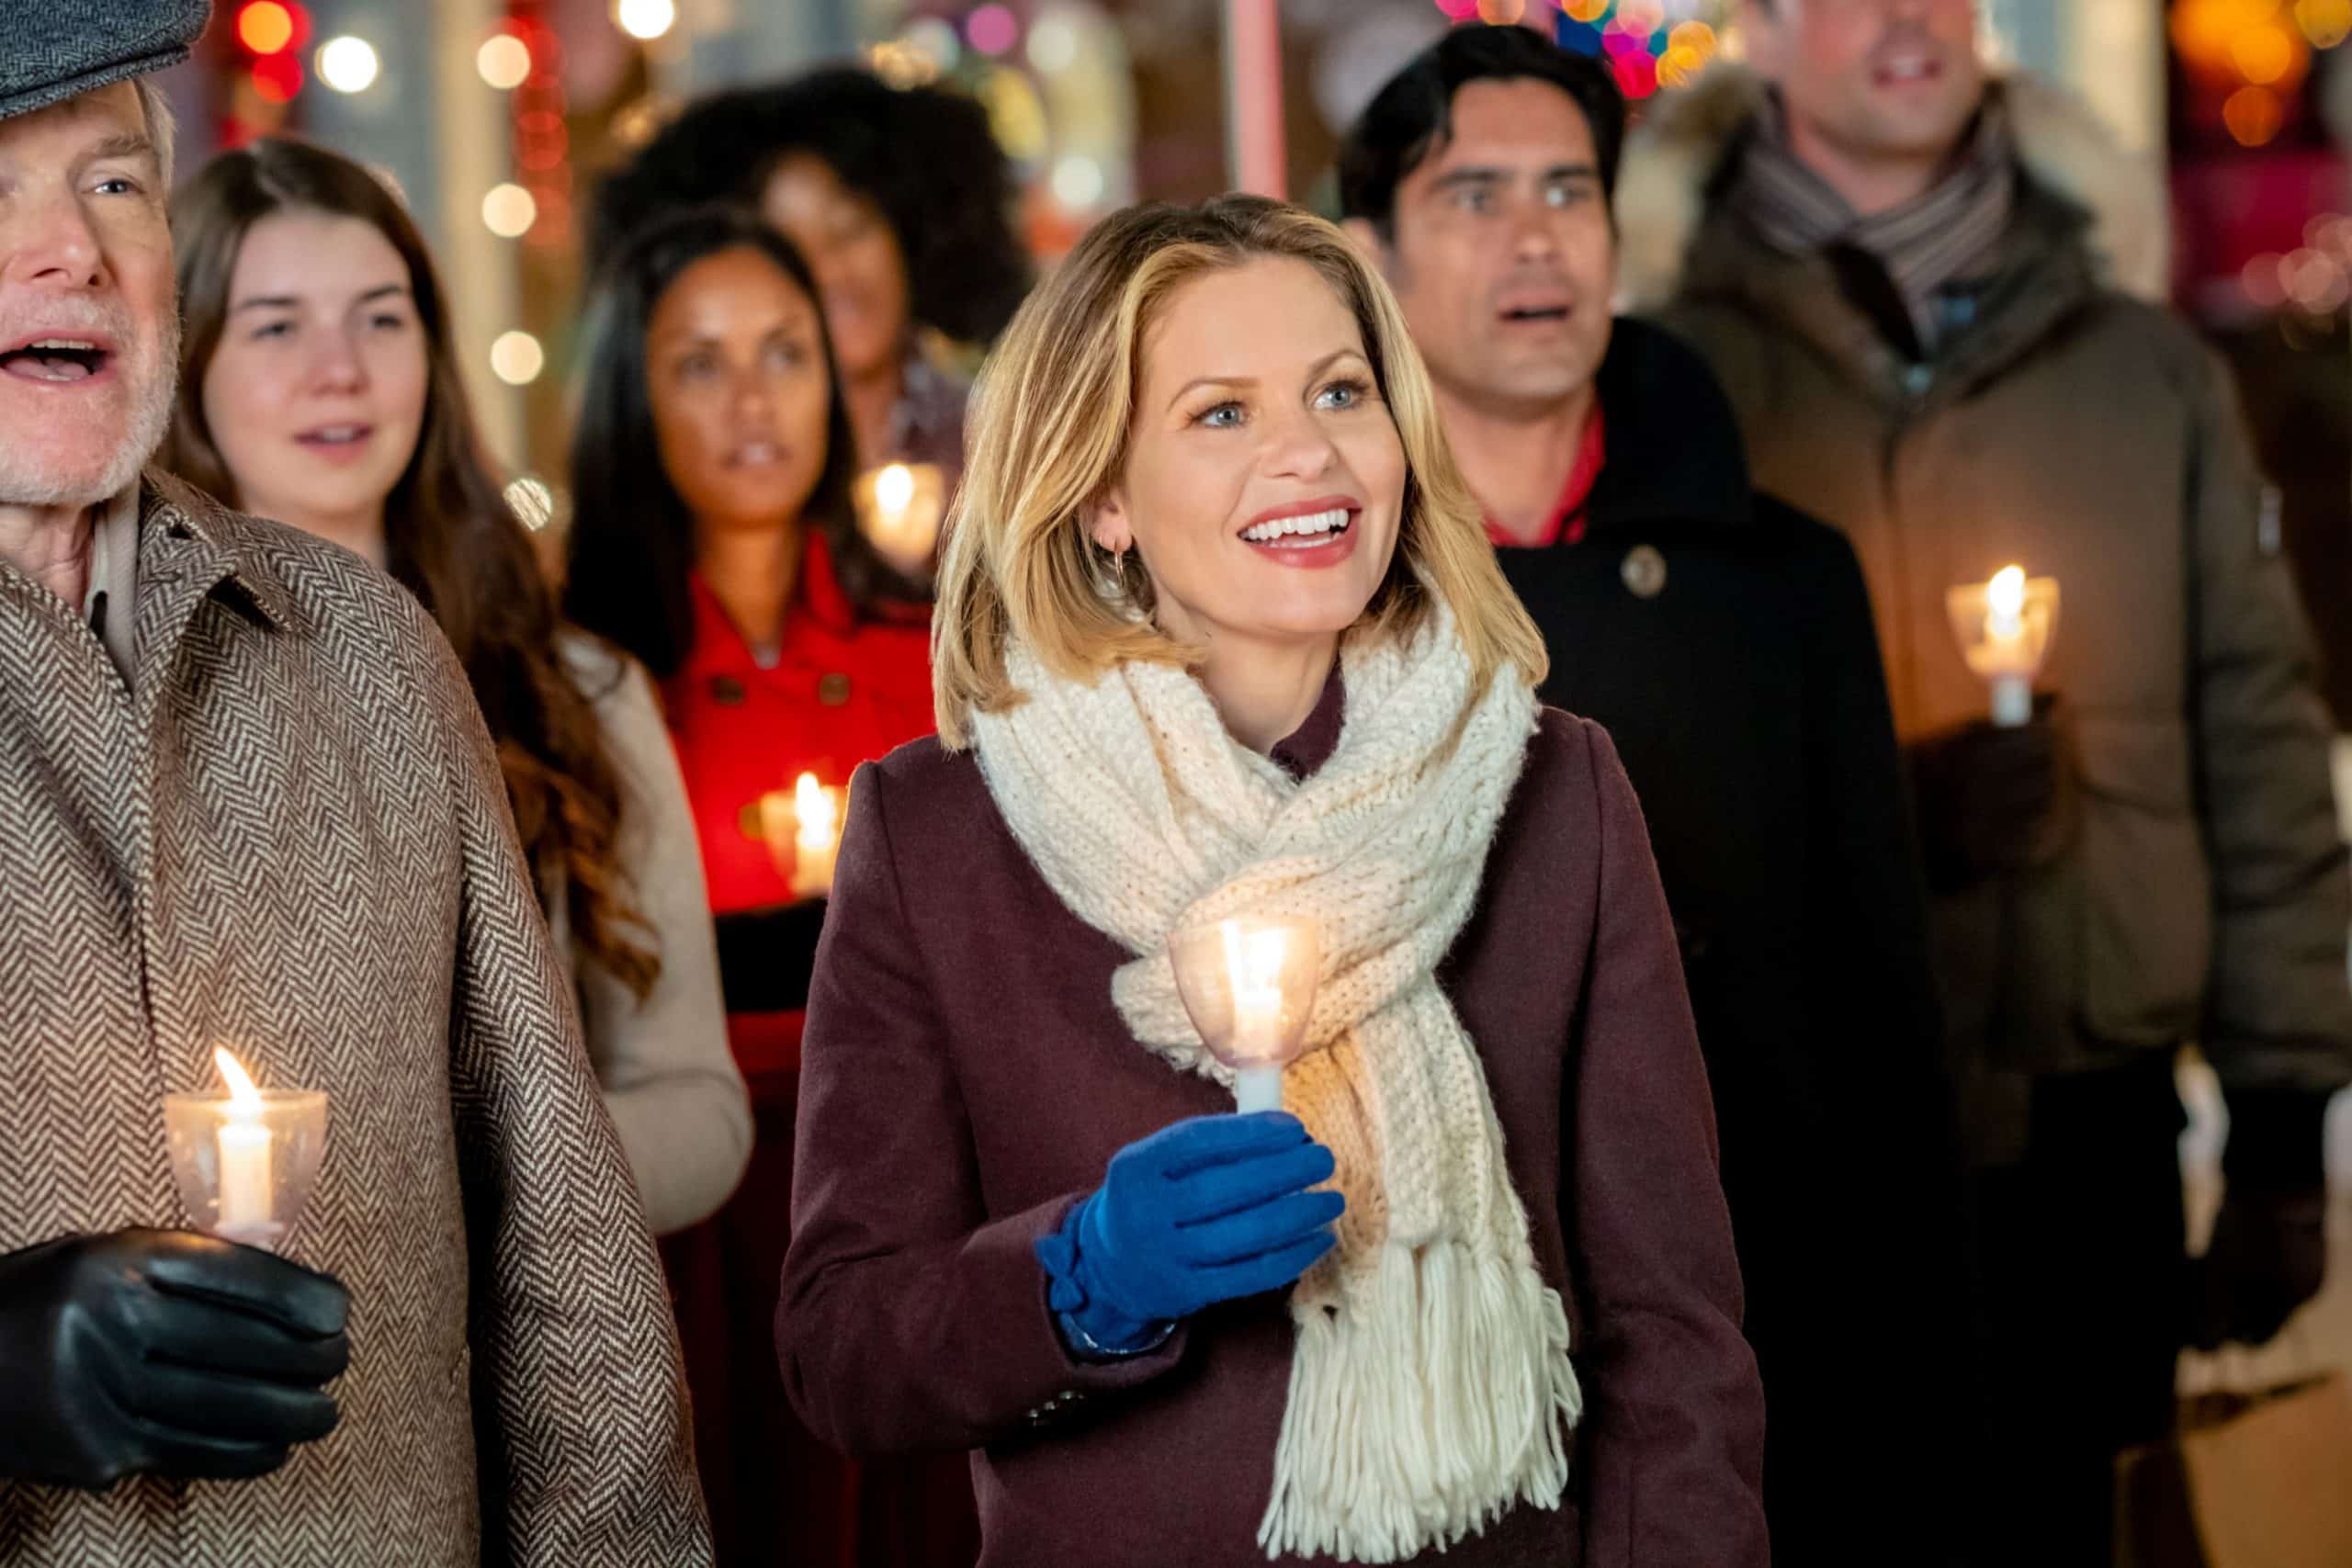 CHRISTMAS TOWN, Candace Cameron Bure (center), (aired Dec. 1, 2019)